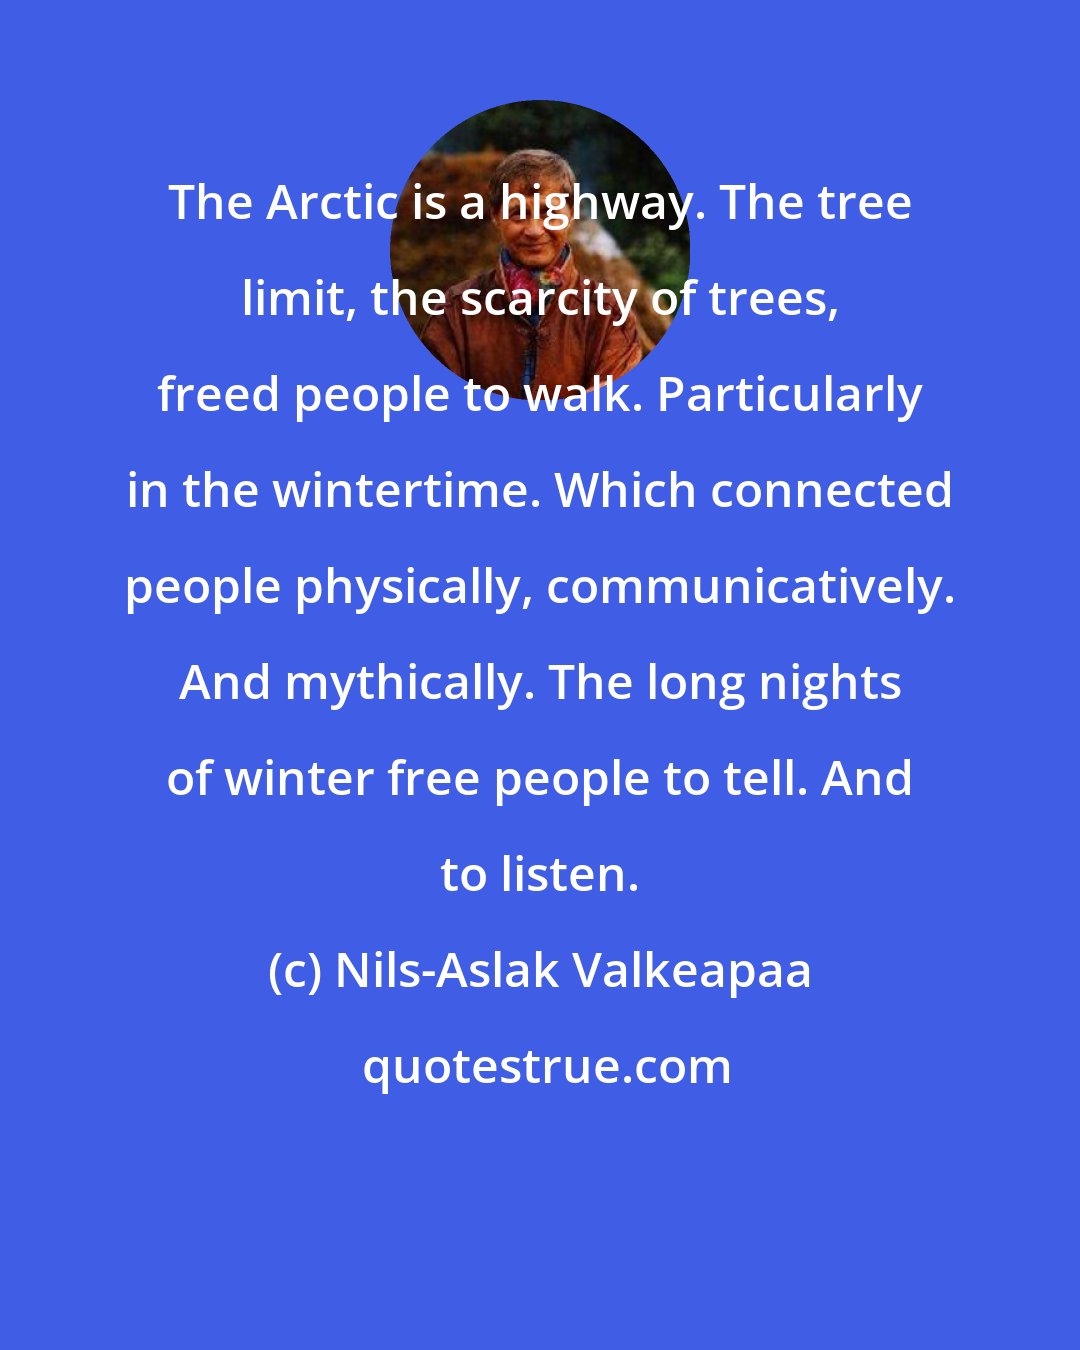 Nils-Aslak Valkeapaa: The Arctic is a highway. The tree limit, the scarcity of trees, freed people to walk. Particularly in the wintertime. Which connected people physically, communicatively. And mythically. The long nights of winter free people to tell. And to listen.